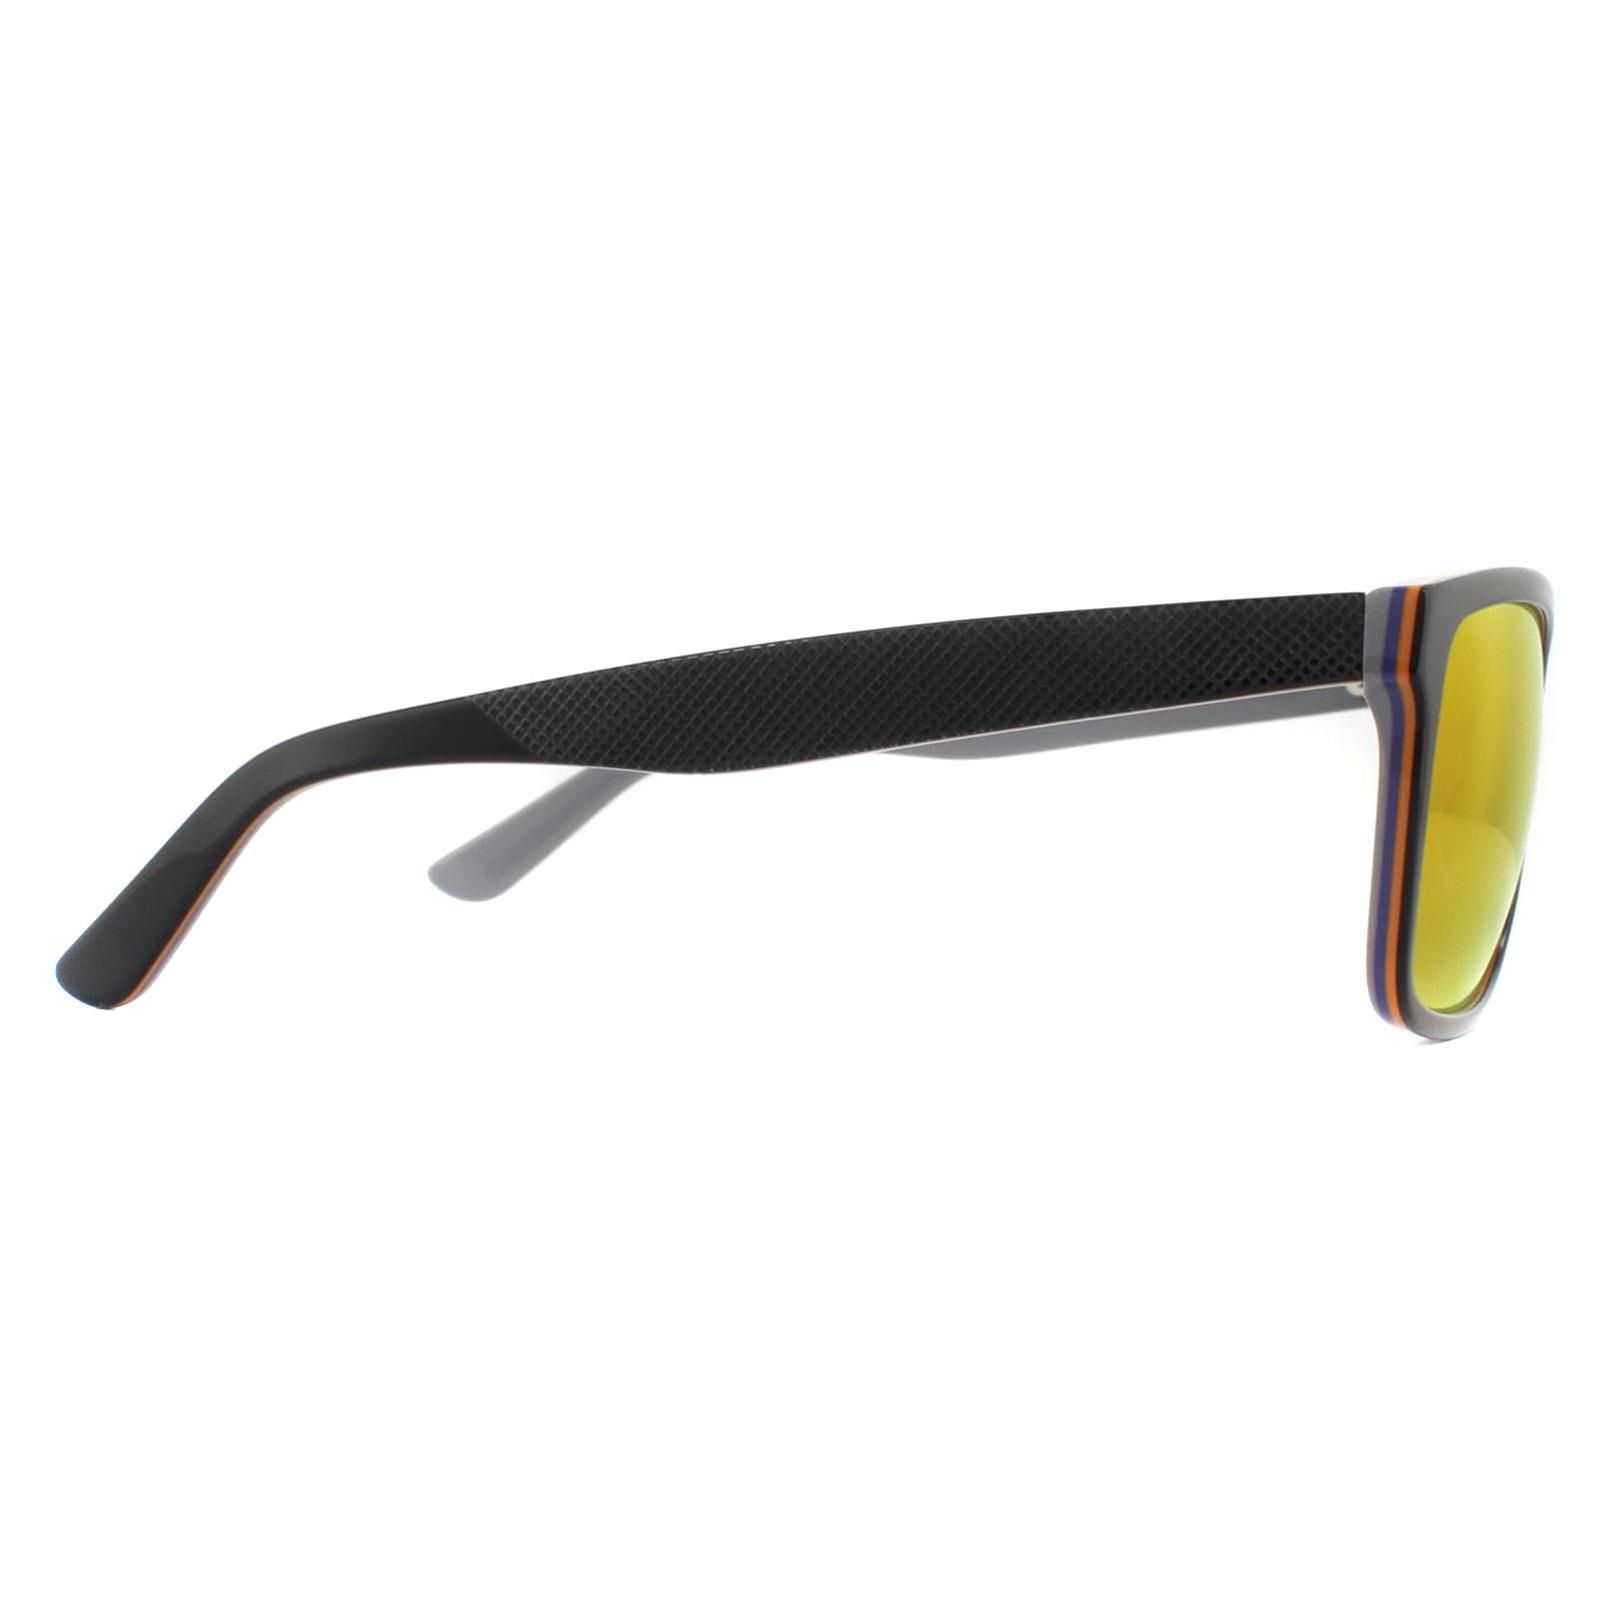 Lacoste Sunglasses L705S 003 Black Grey Red Mirror are a classic rectangular style with some nice touches of colour from Lacoste with the iconic alligator logo at the temples.